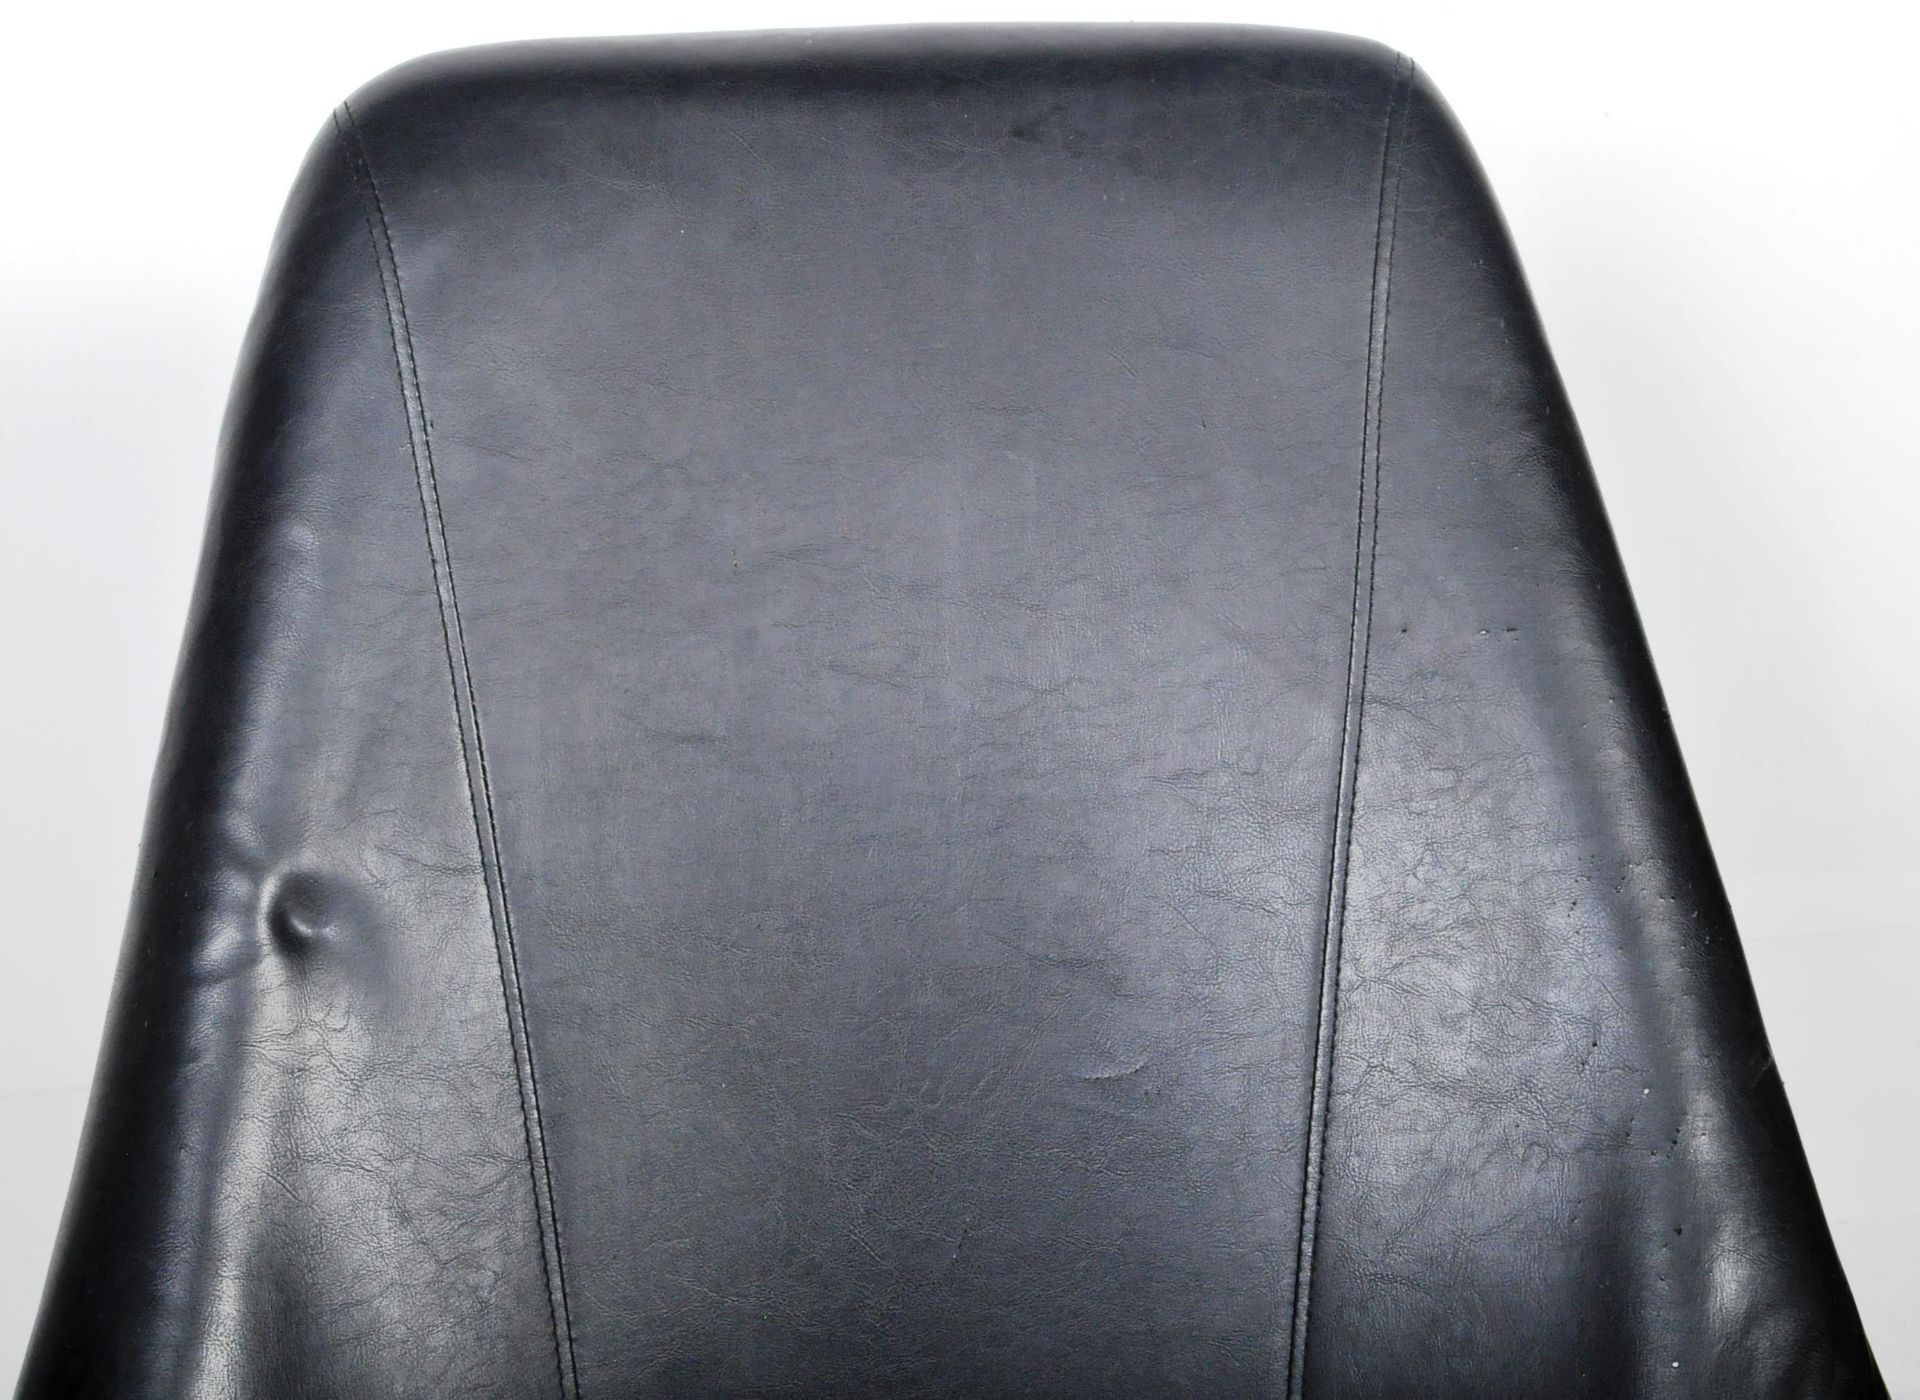 RETRO 1970'S BLACK LEATHER EGG CHAIR RAISED ON A CHROME BASE - Image 3 of 6